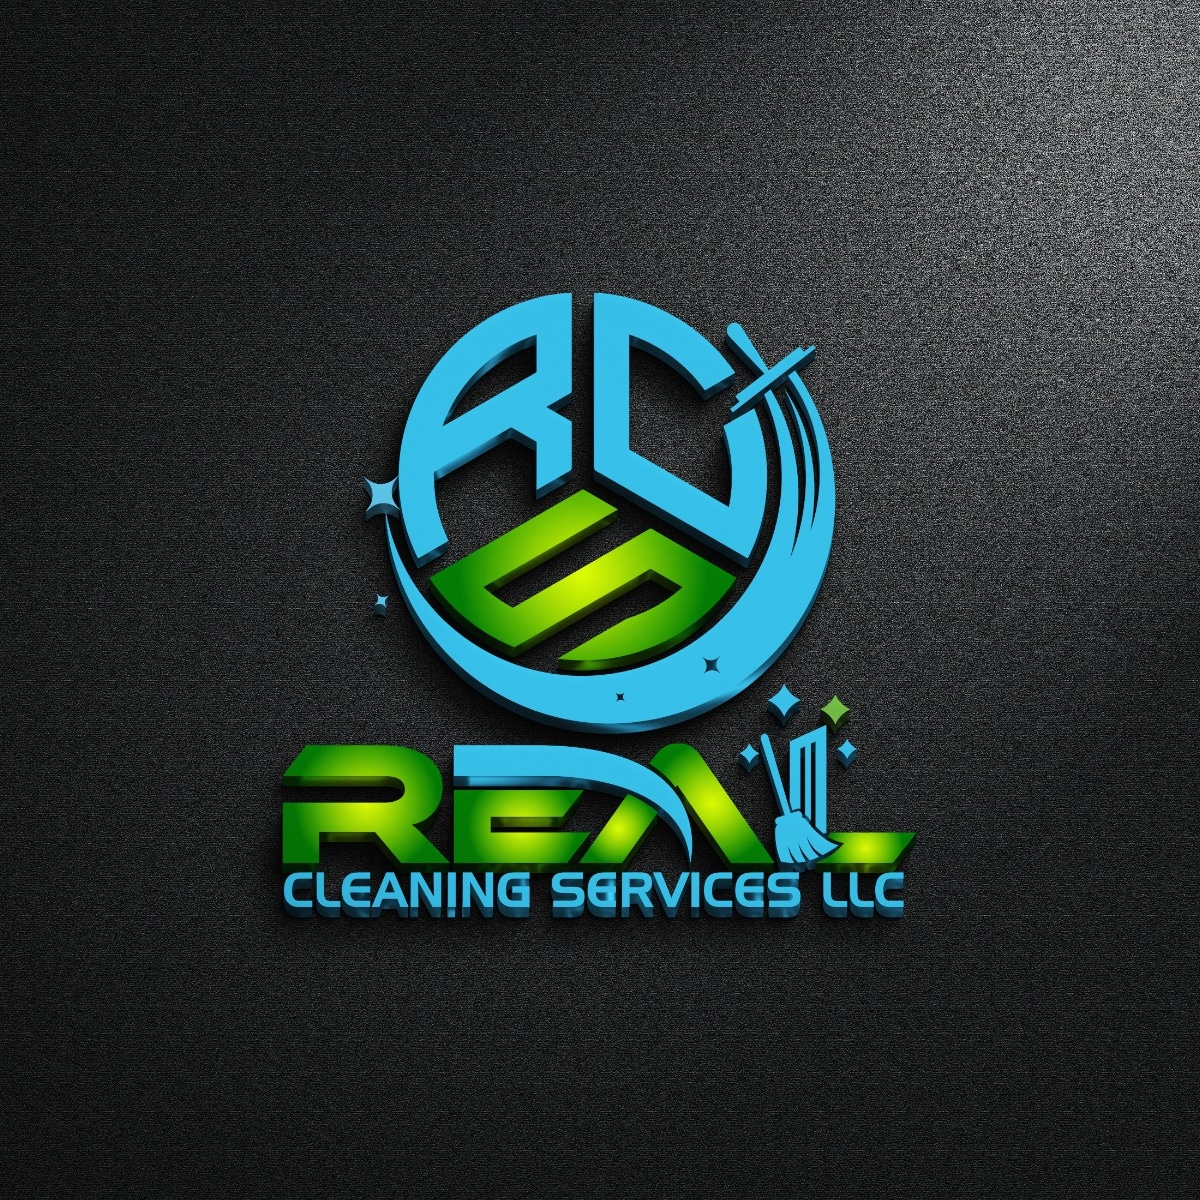 Real Cleaning Services LLC Logo